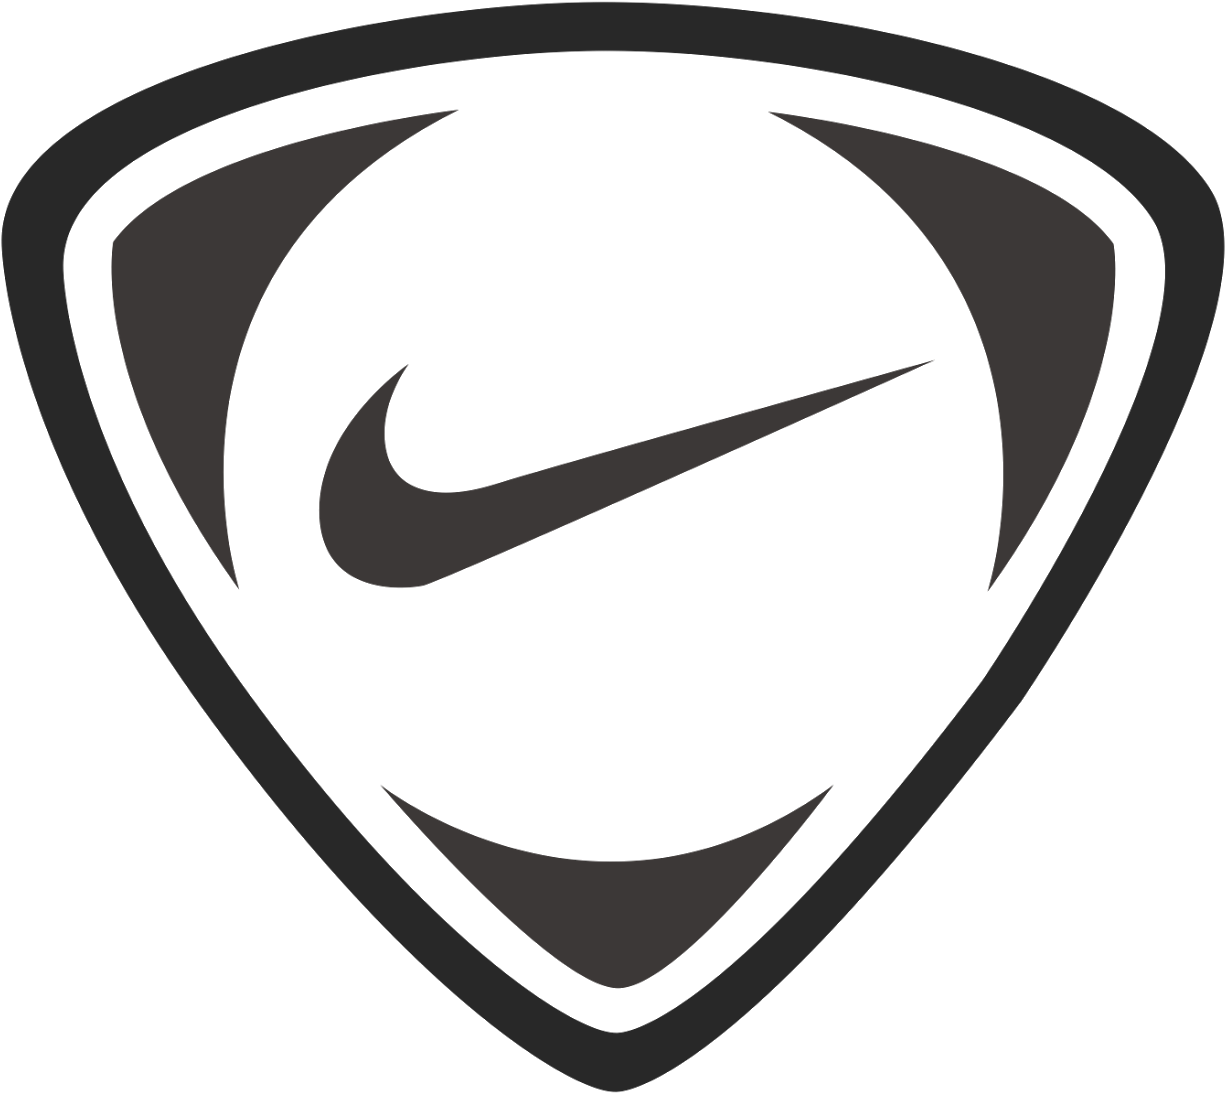 Download Nike Logo Vector Free Download Cloudinvitationcom - Nike Total 90  Logo PNG Image with No Background - PNGkey.com